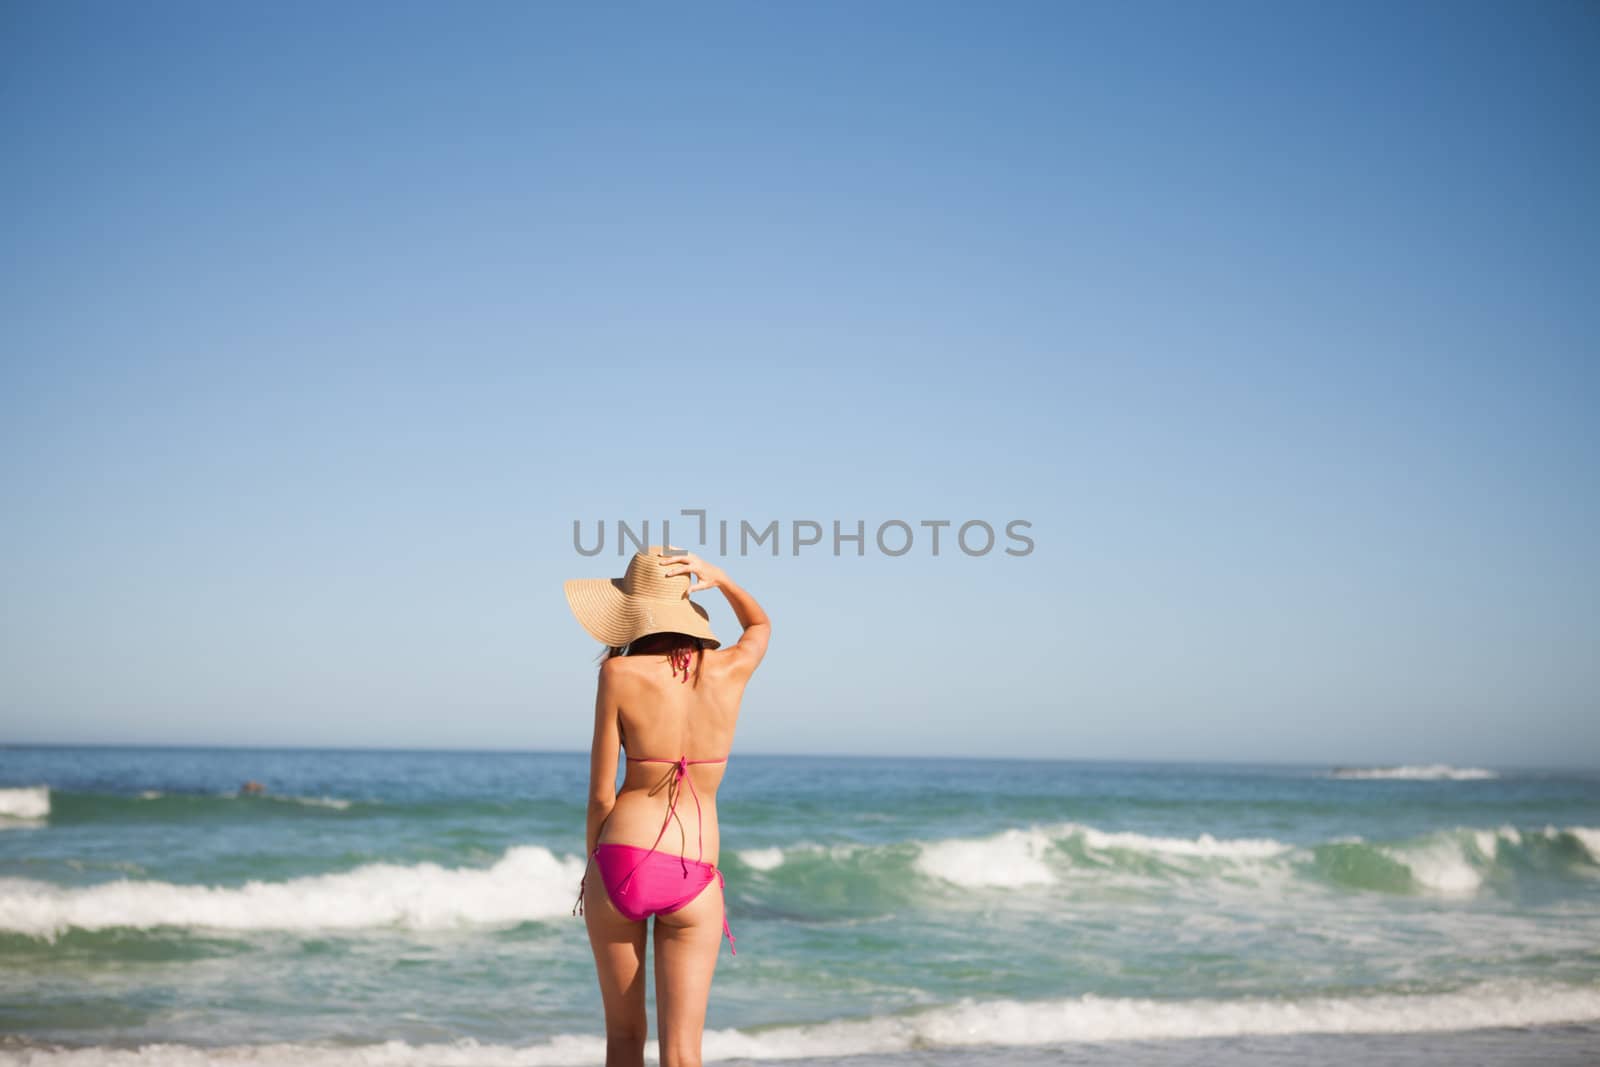 Back view of an attractive woman in beachwear standing on the beach